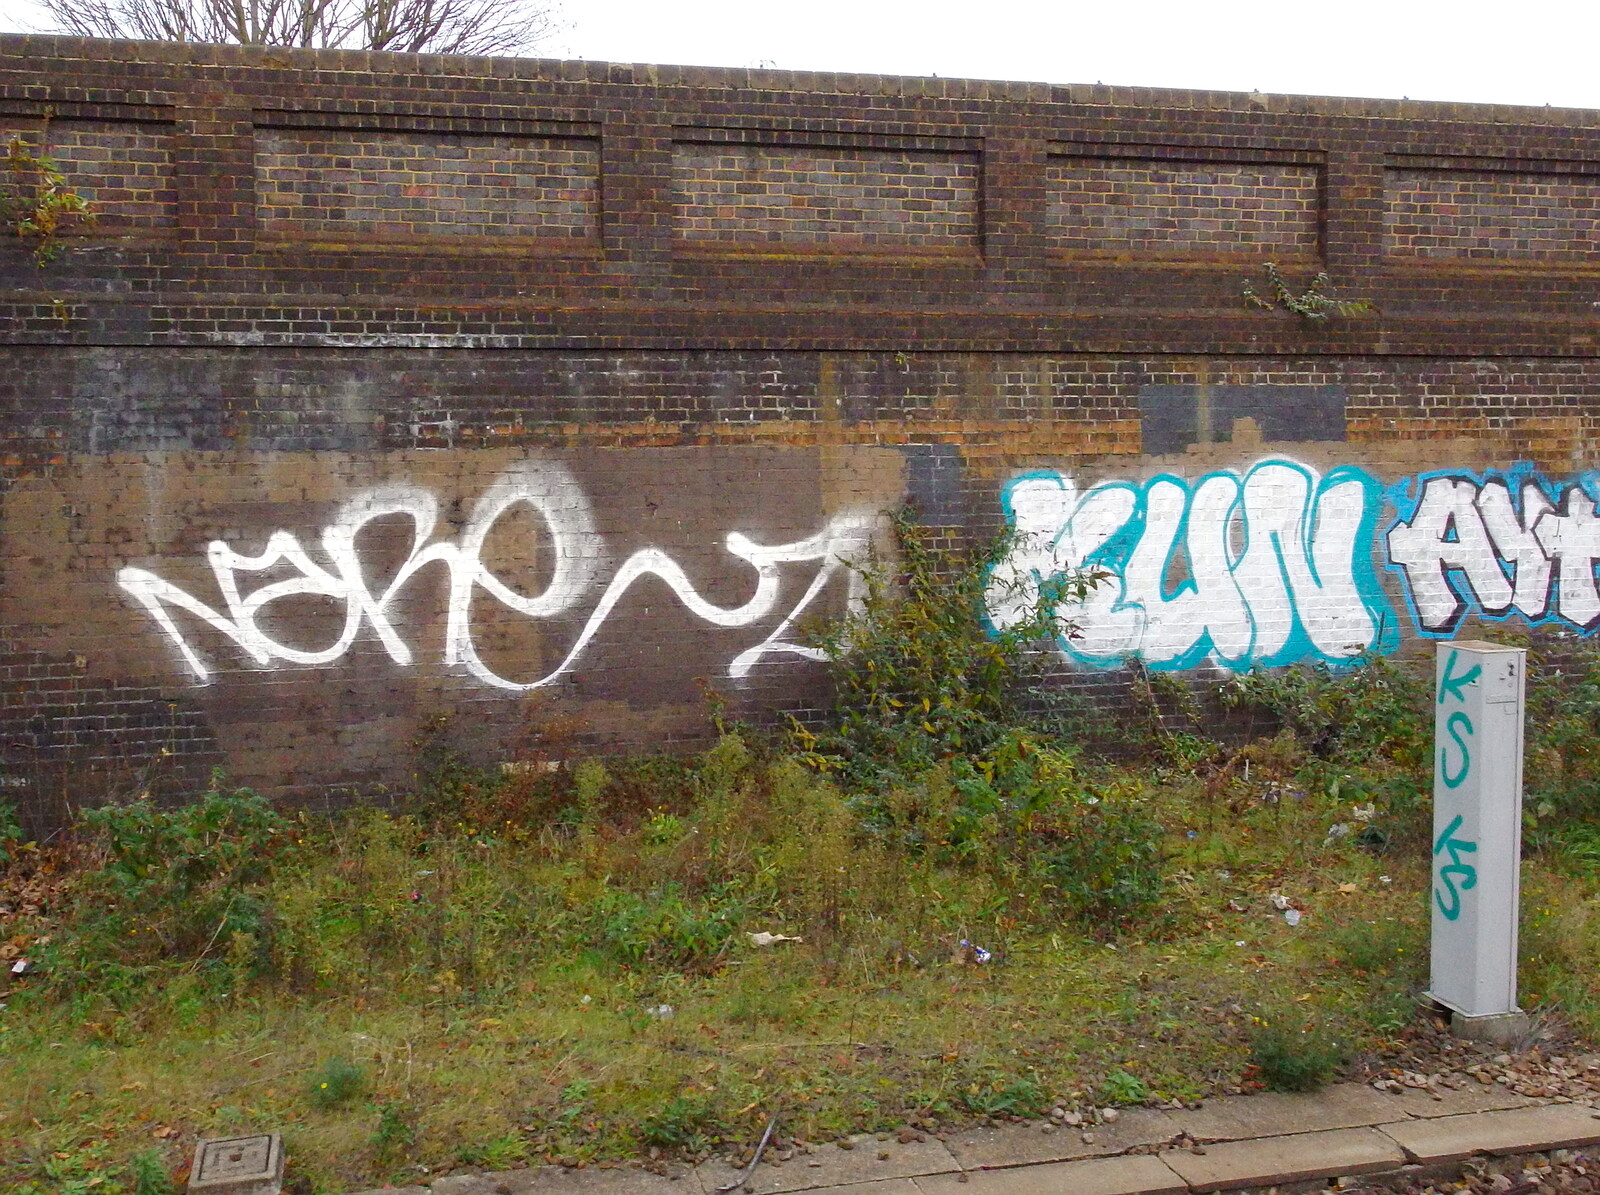 More trackside graffiti from SwiftKey's Arcade Cabinet, and the Streets of Southwark, London - 5th December 2013